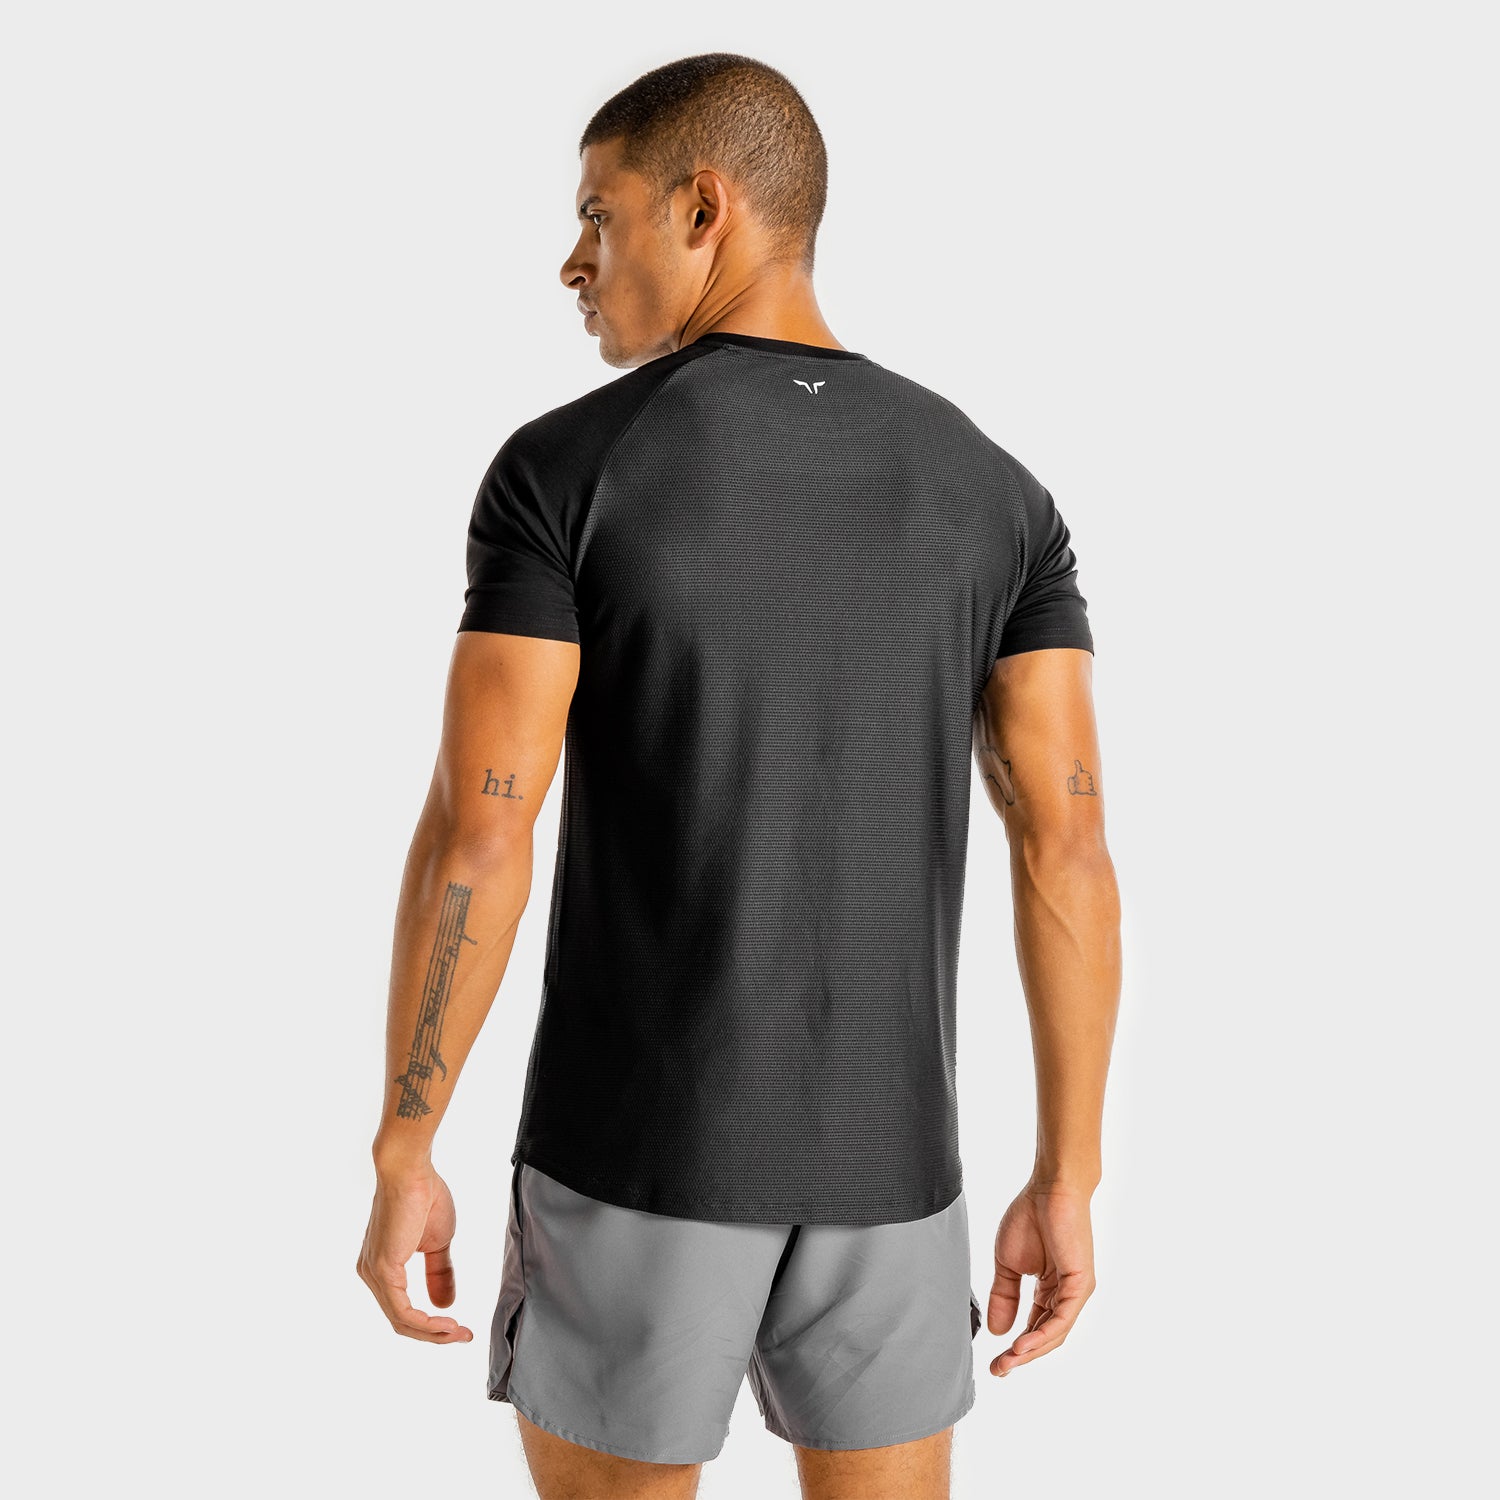 squatwolf-gym-wear-core-tee-black-workout-shirts-for-men